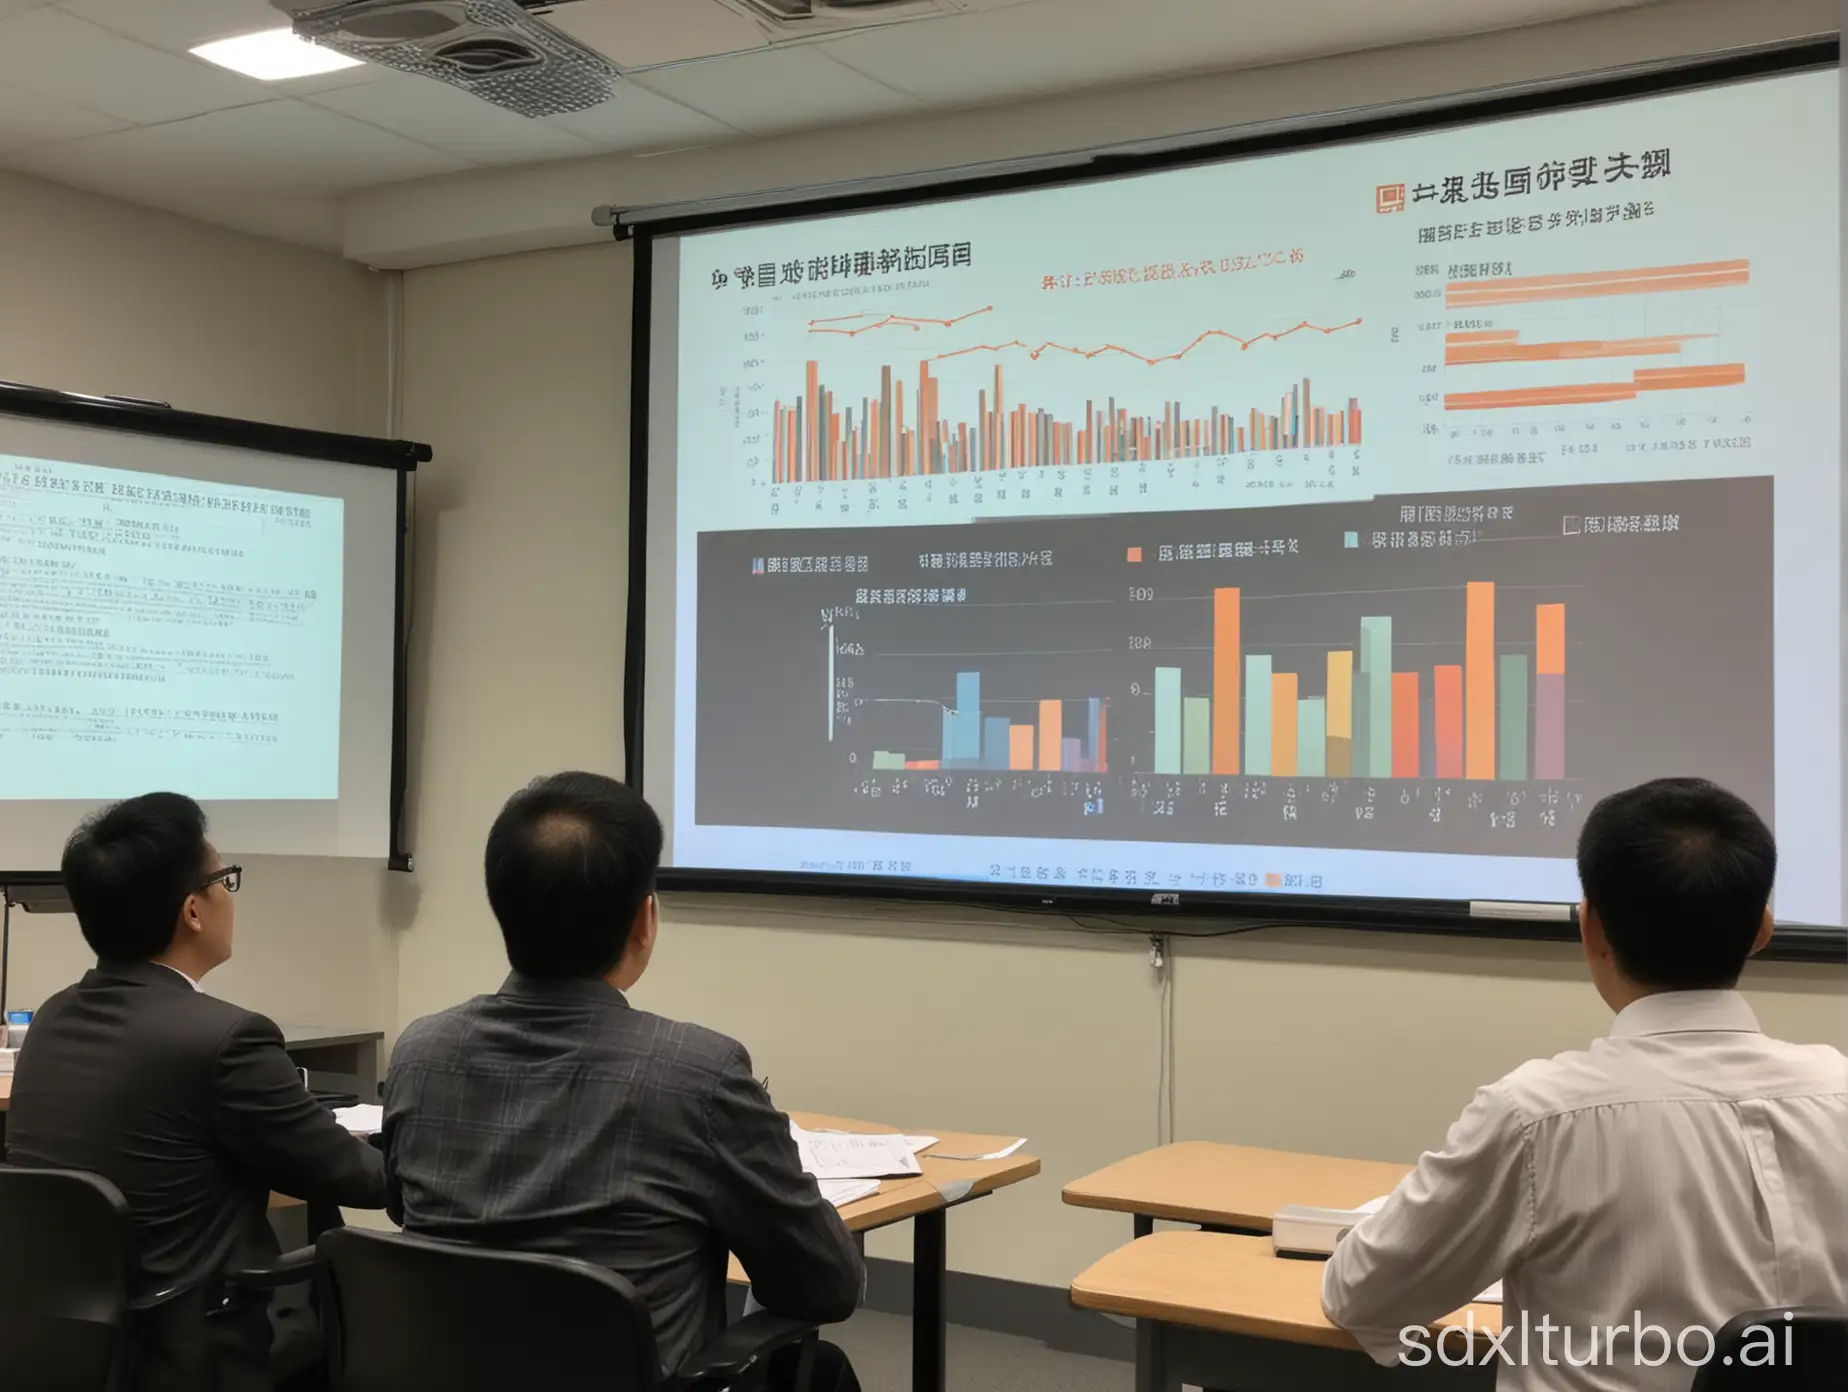 Chinese-Lecturer-Teaching-Data-Analysis-to-Corporate-Managers-with-Projection-PPT